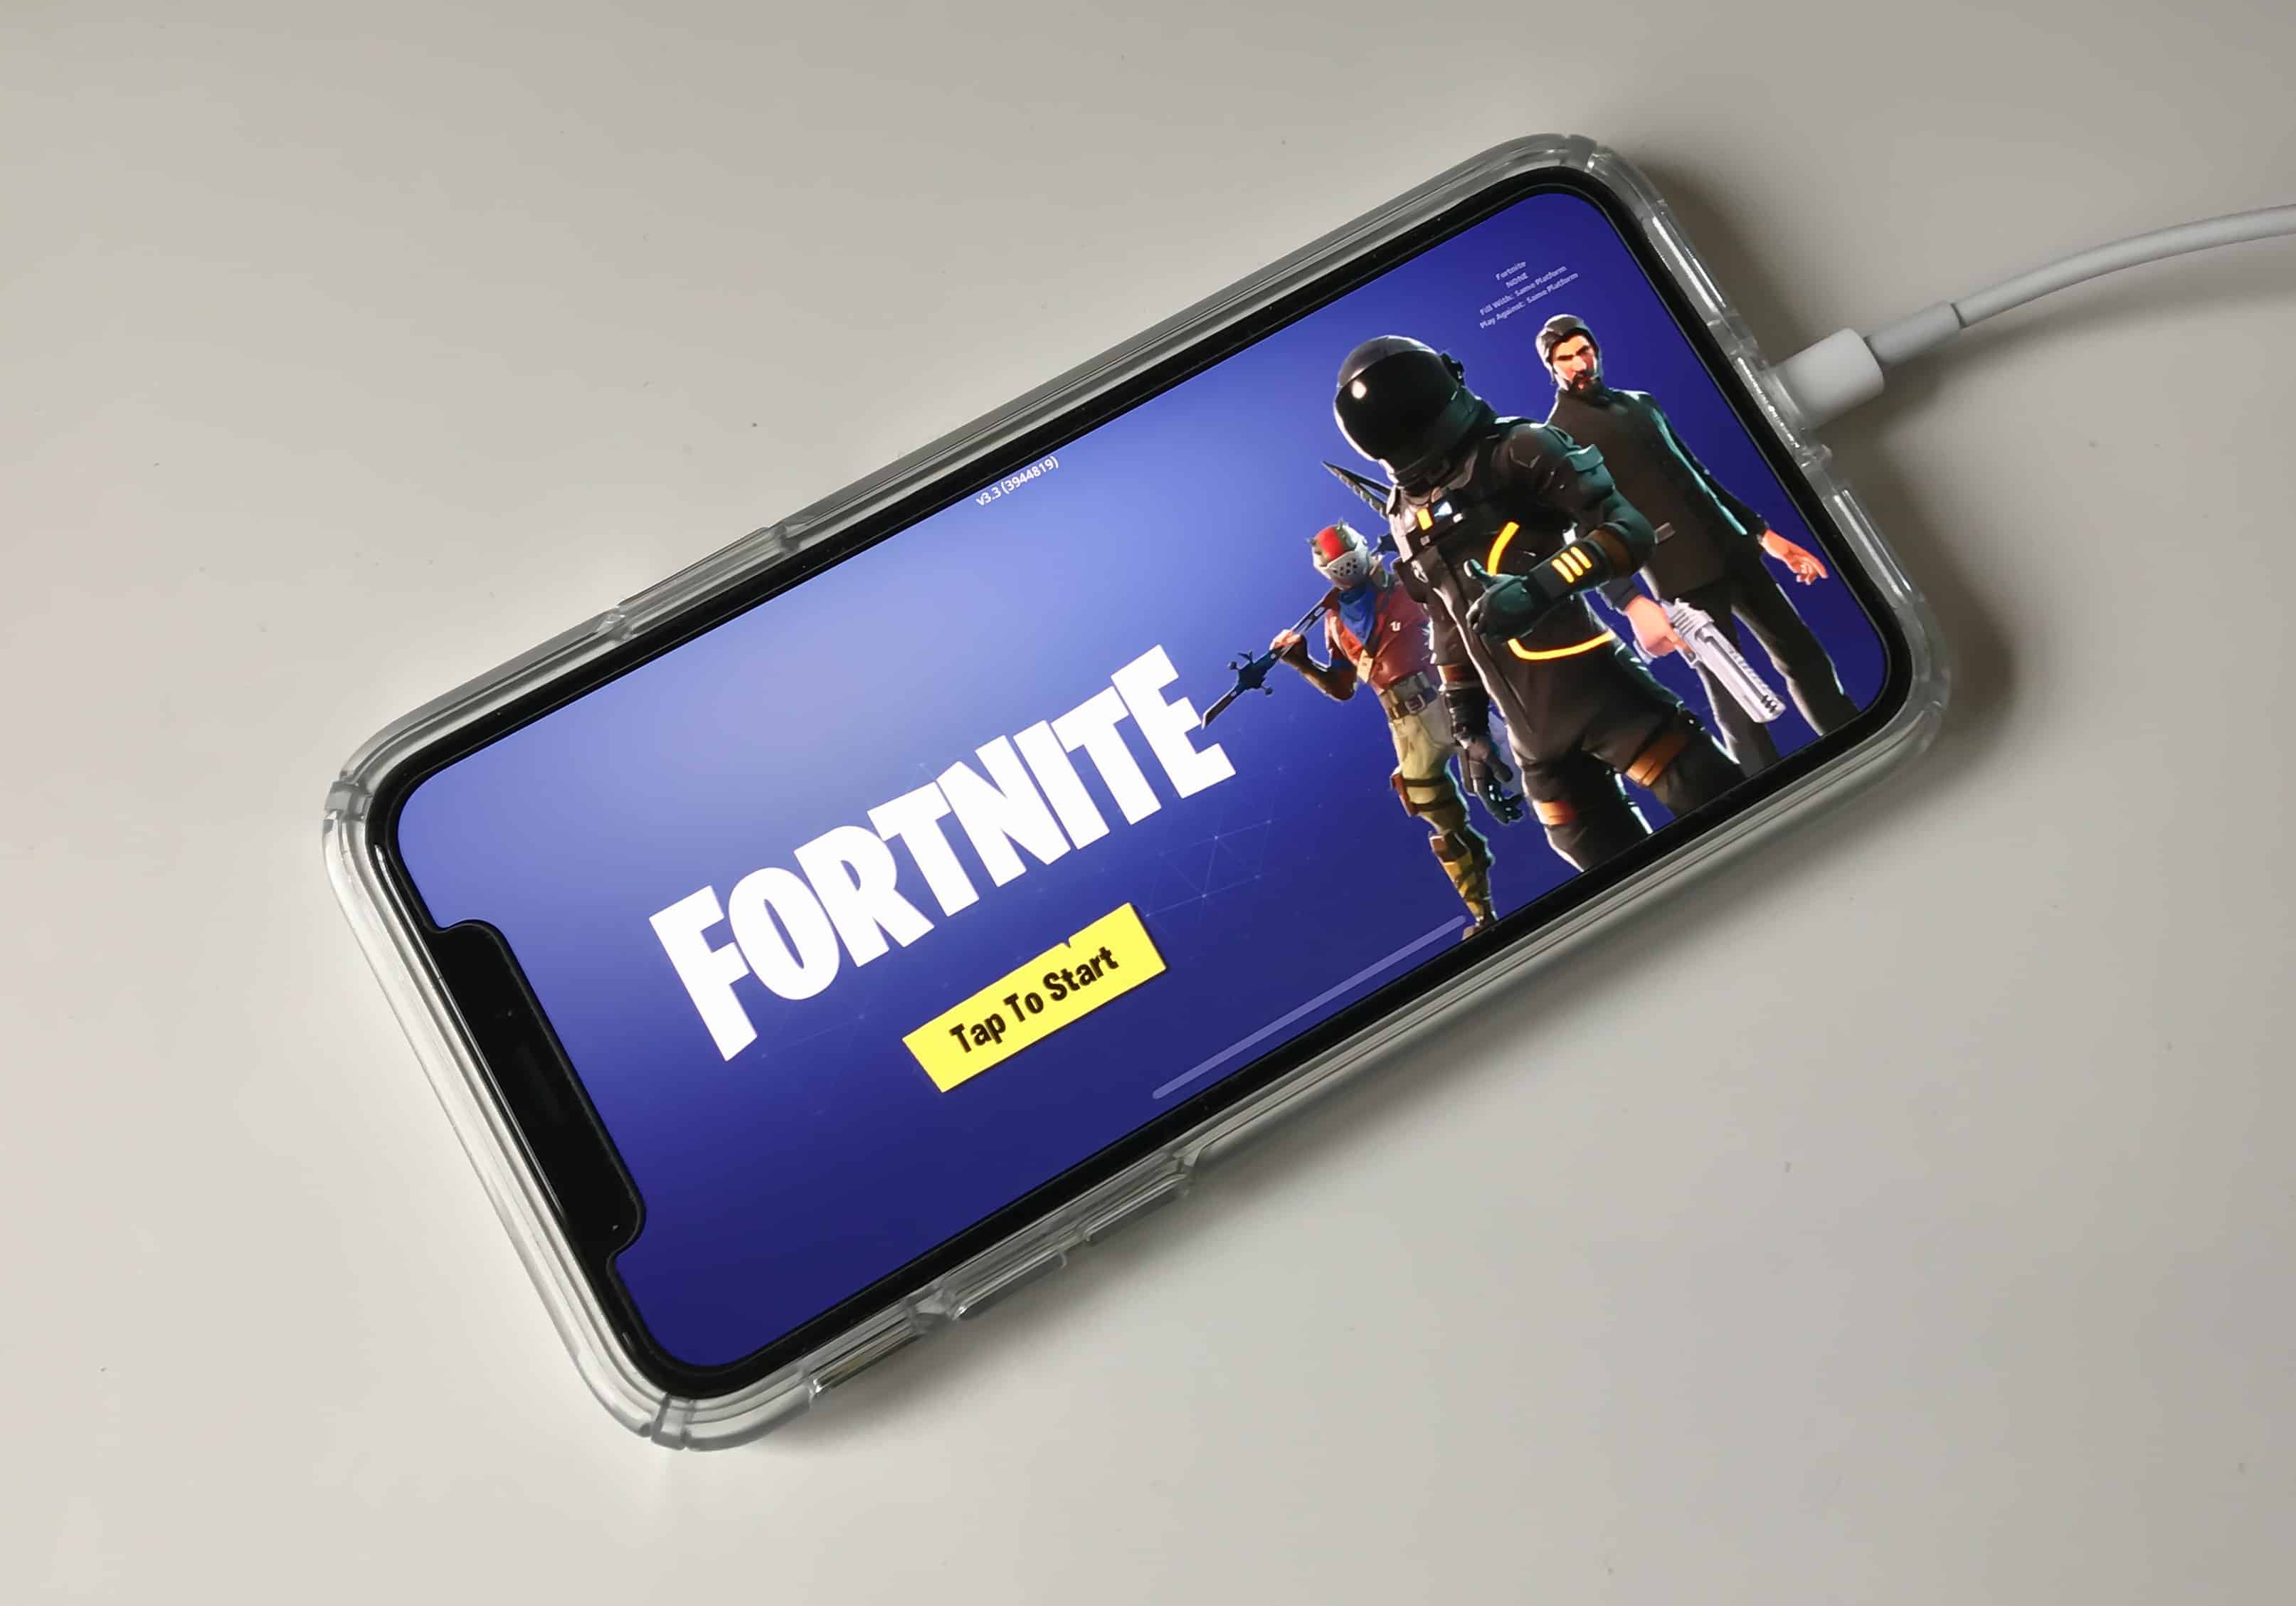 If You Play Fortnite Or PUBG On Mobile You Might Want To Wait Before Updating To iOS 13.0